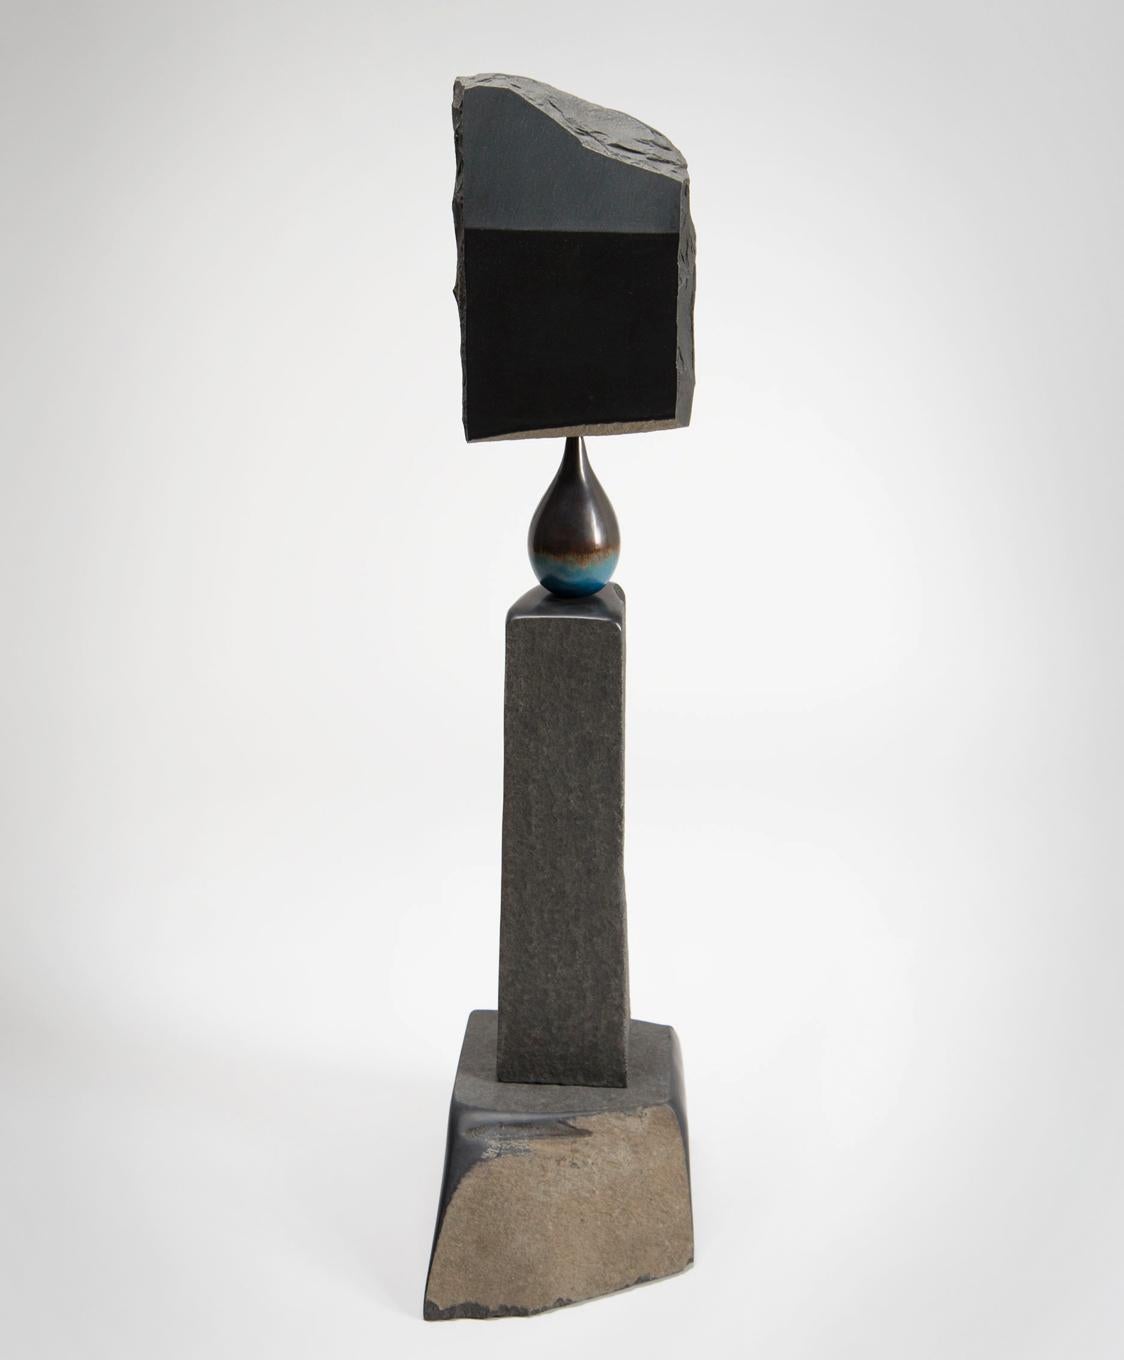 Rebecca Johnson Abstract Sculpture - "Water Table" abstract bronze and stone sculpture